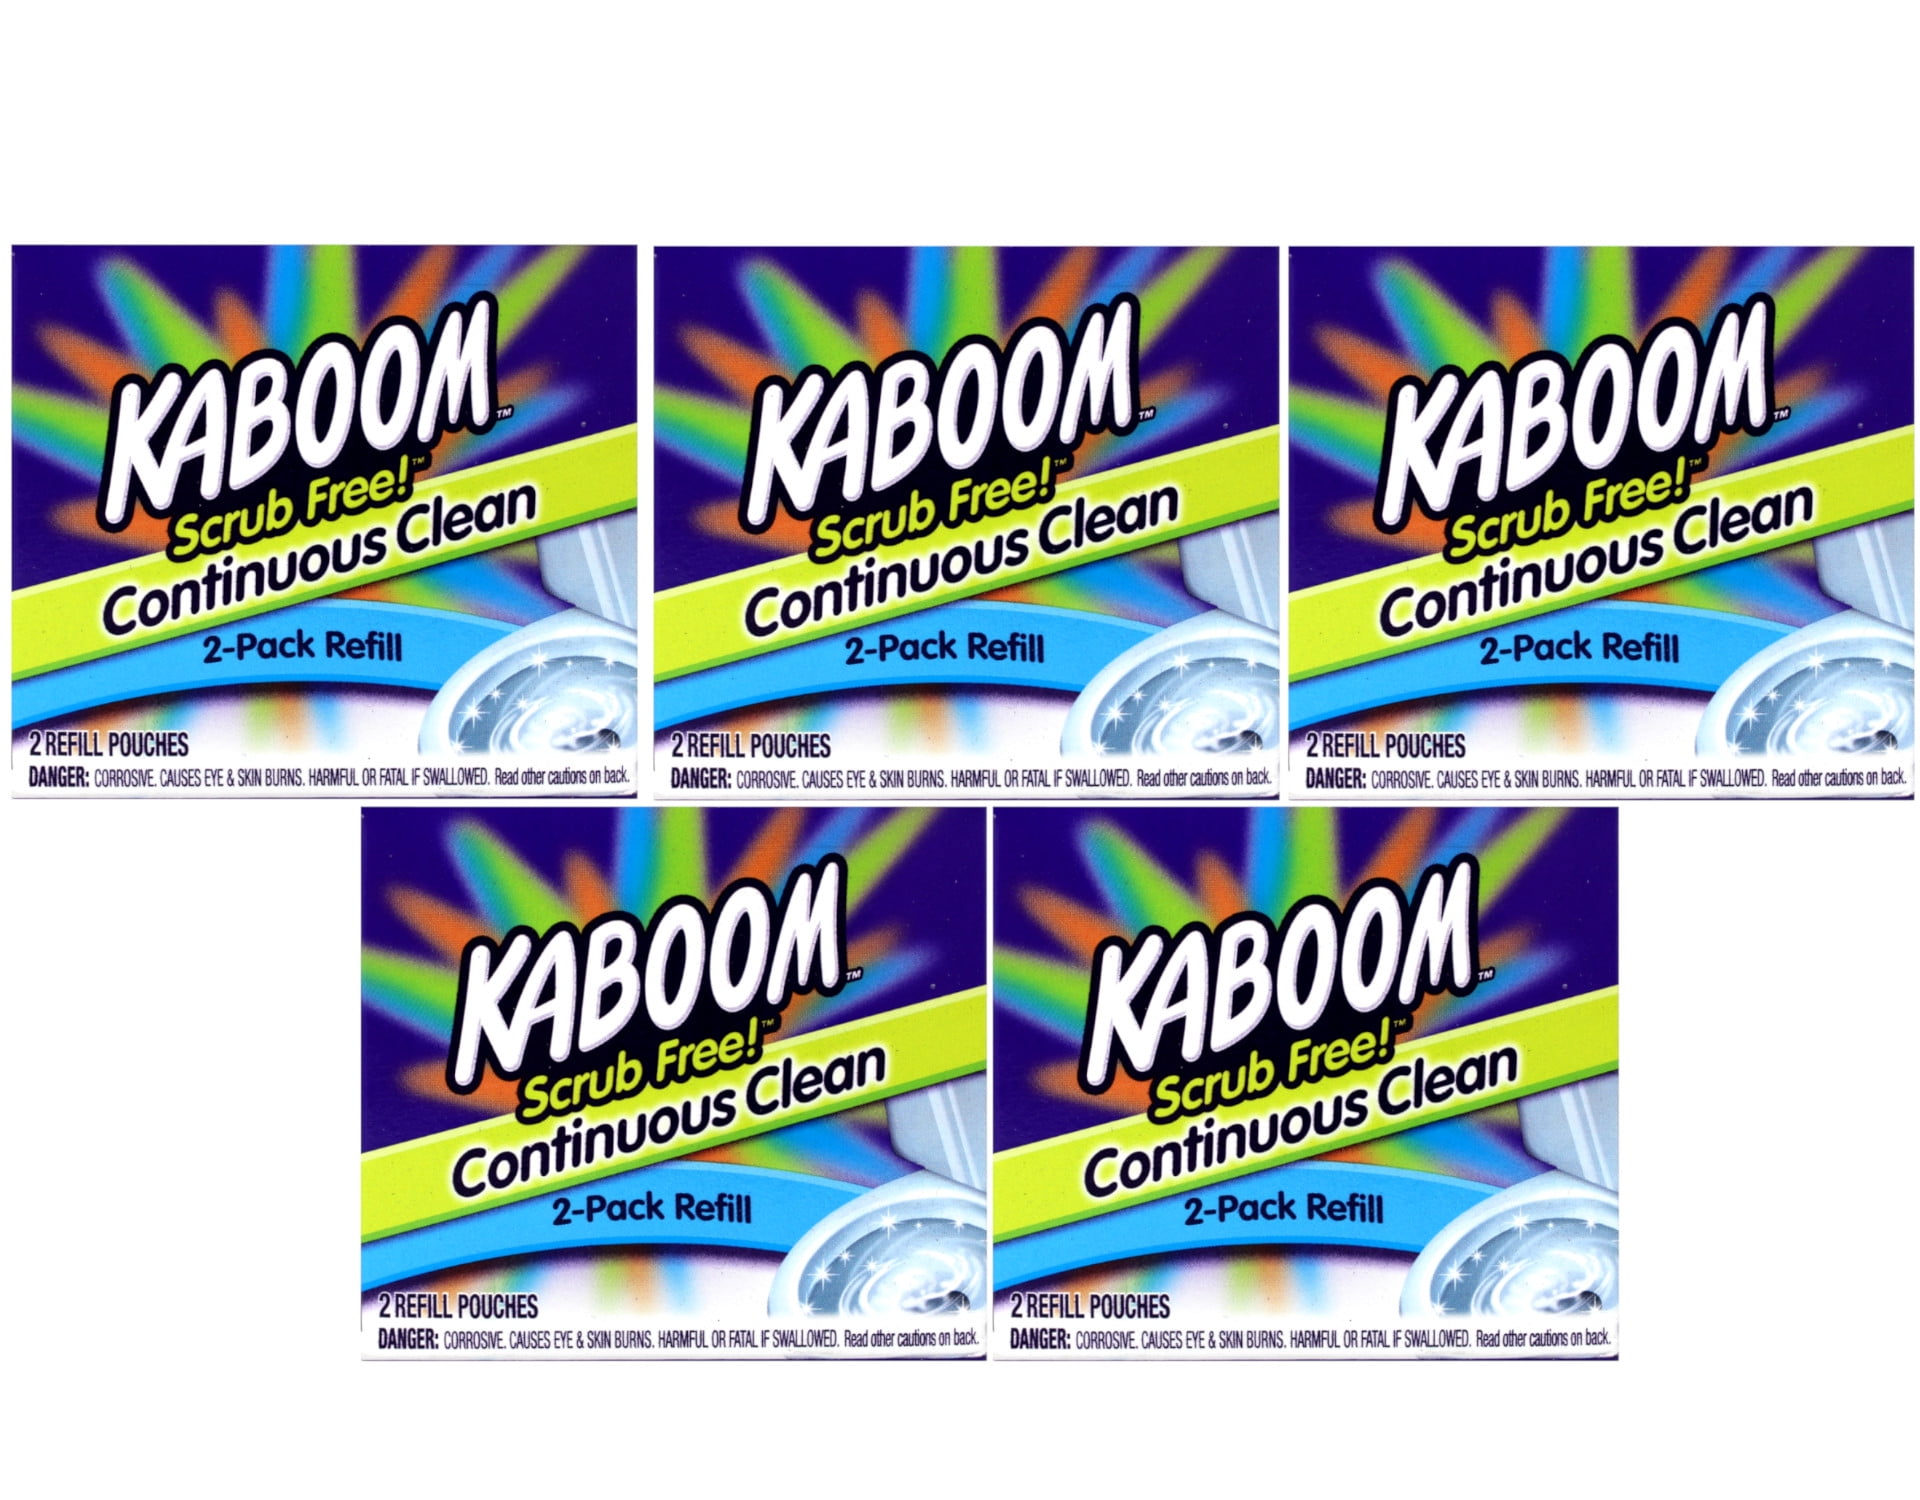 KABOOM 35113 Scrub Free Continuous Automatic Toilet Cleaning System NEW!  8595118 885593773551